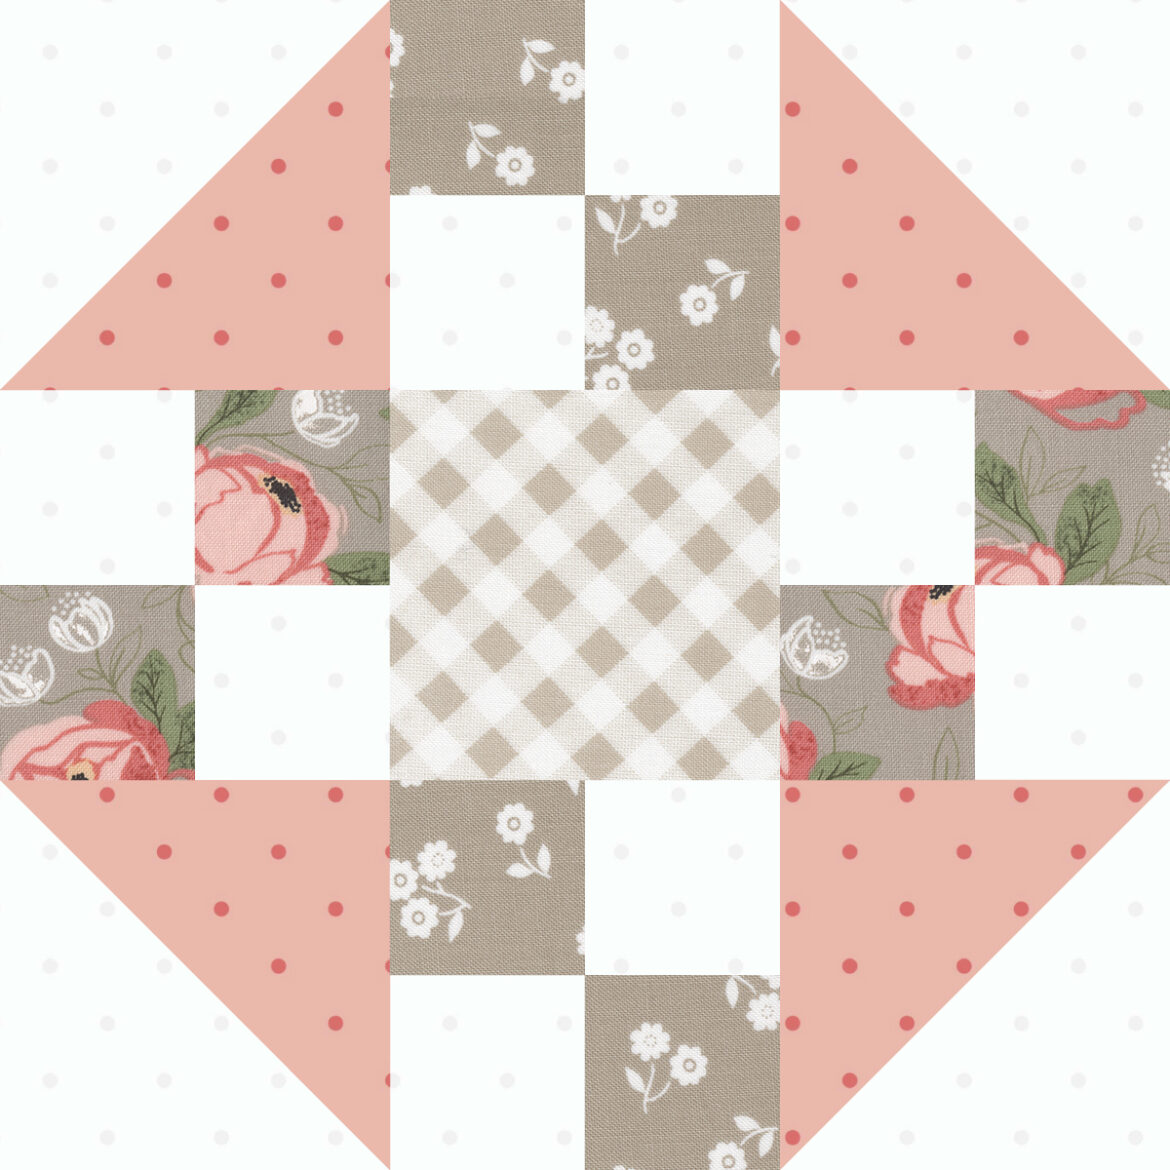 Sewcialites 2 Block 20 "Fascinate" by Sherri McConnell of A Quilting Life. Fabric is Country Rose by Lella Boutique for Moda Fabrics. Download the free block pattern here.